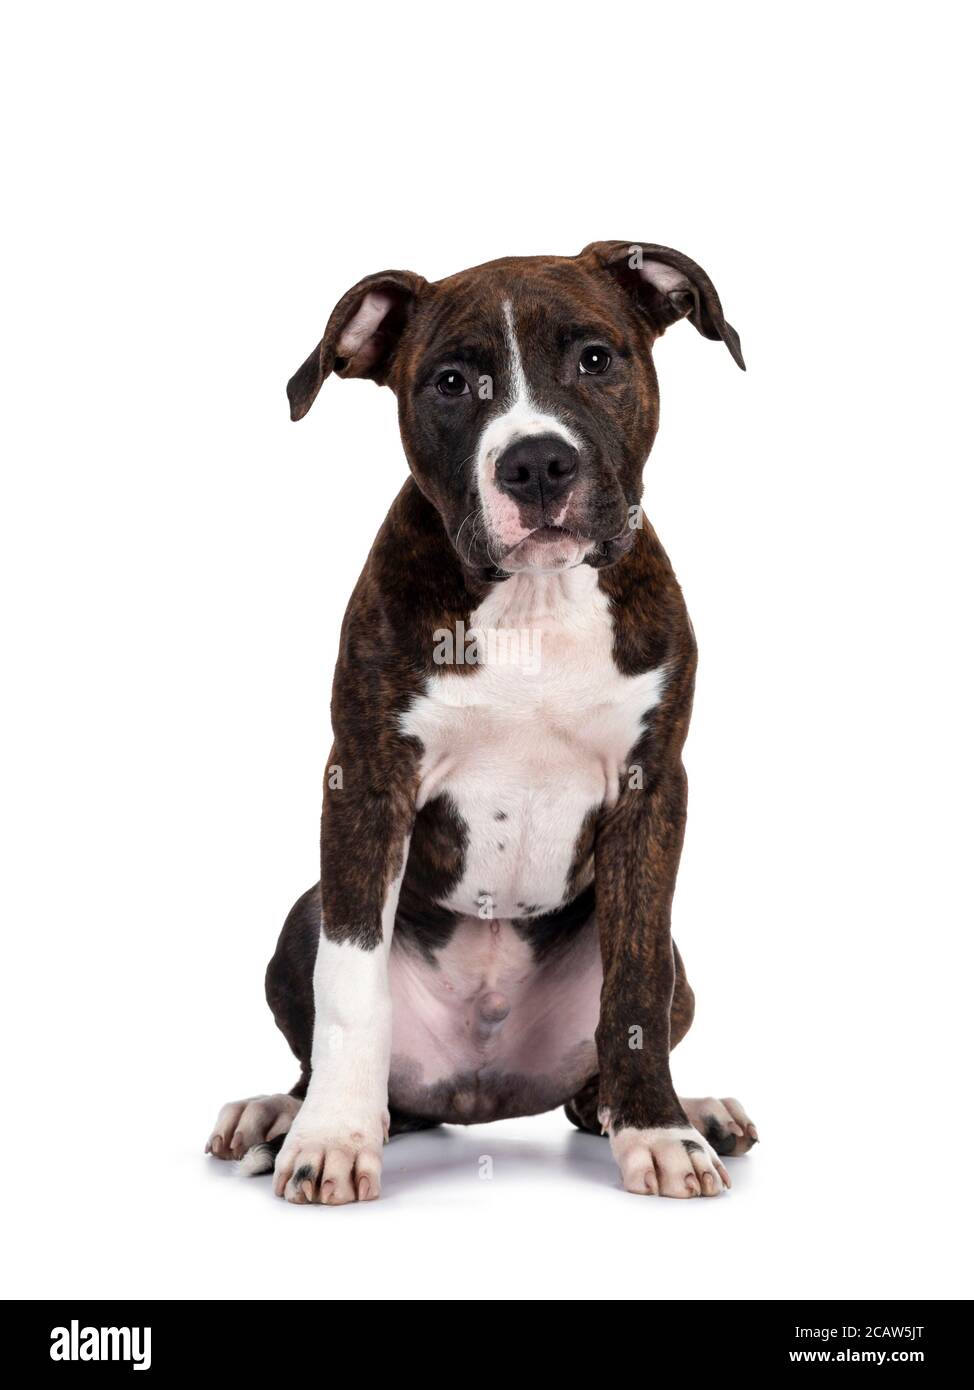 Young brindle with white American Staffordshire Terrier dog, sitting facing front, looking at camera with dark eyes and innocent face. Isolated on whi Stock Photo